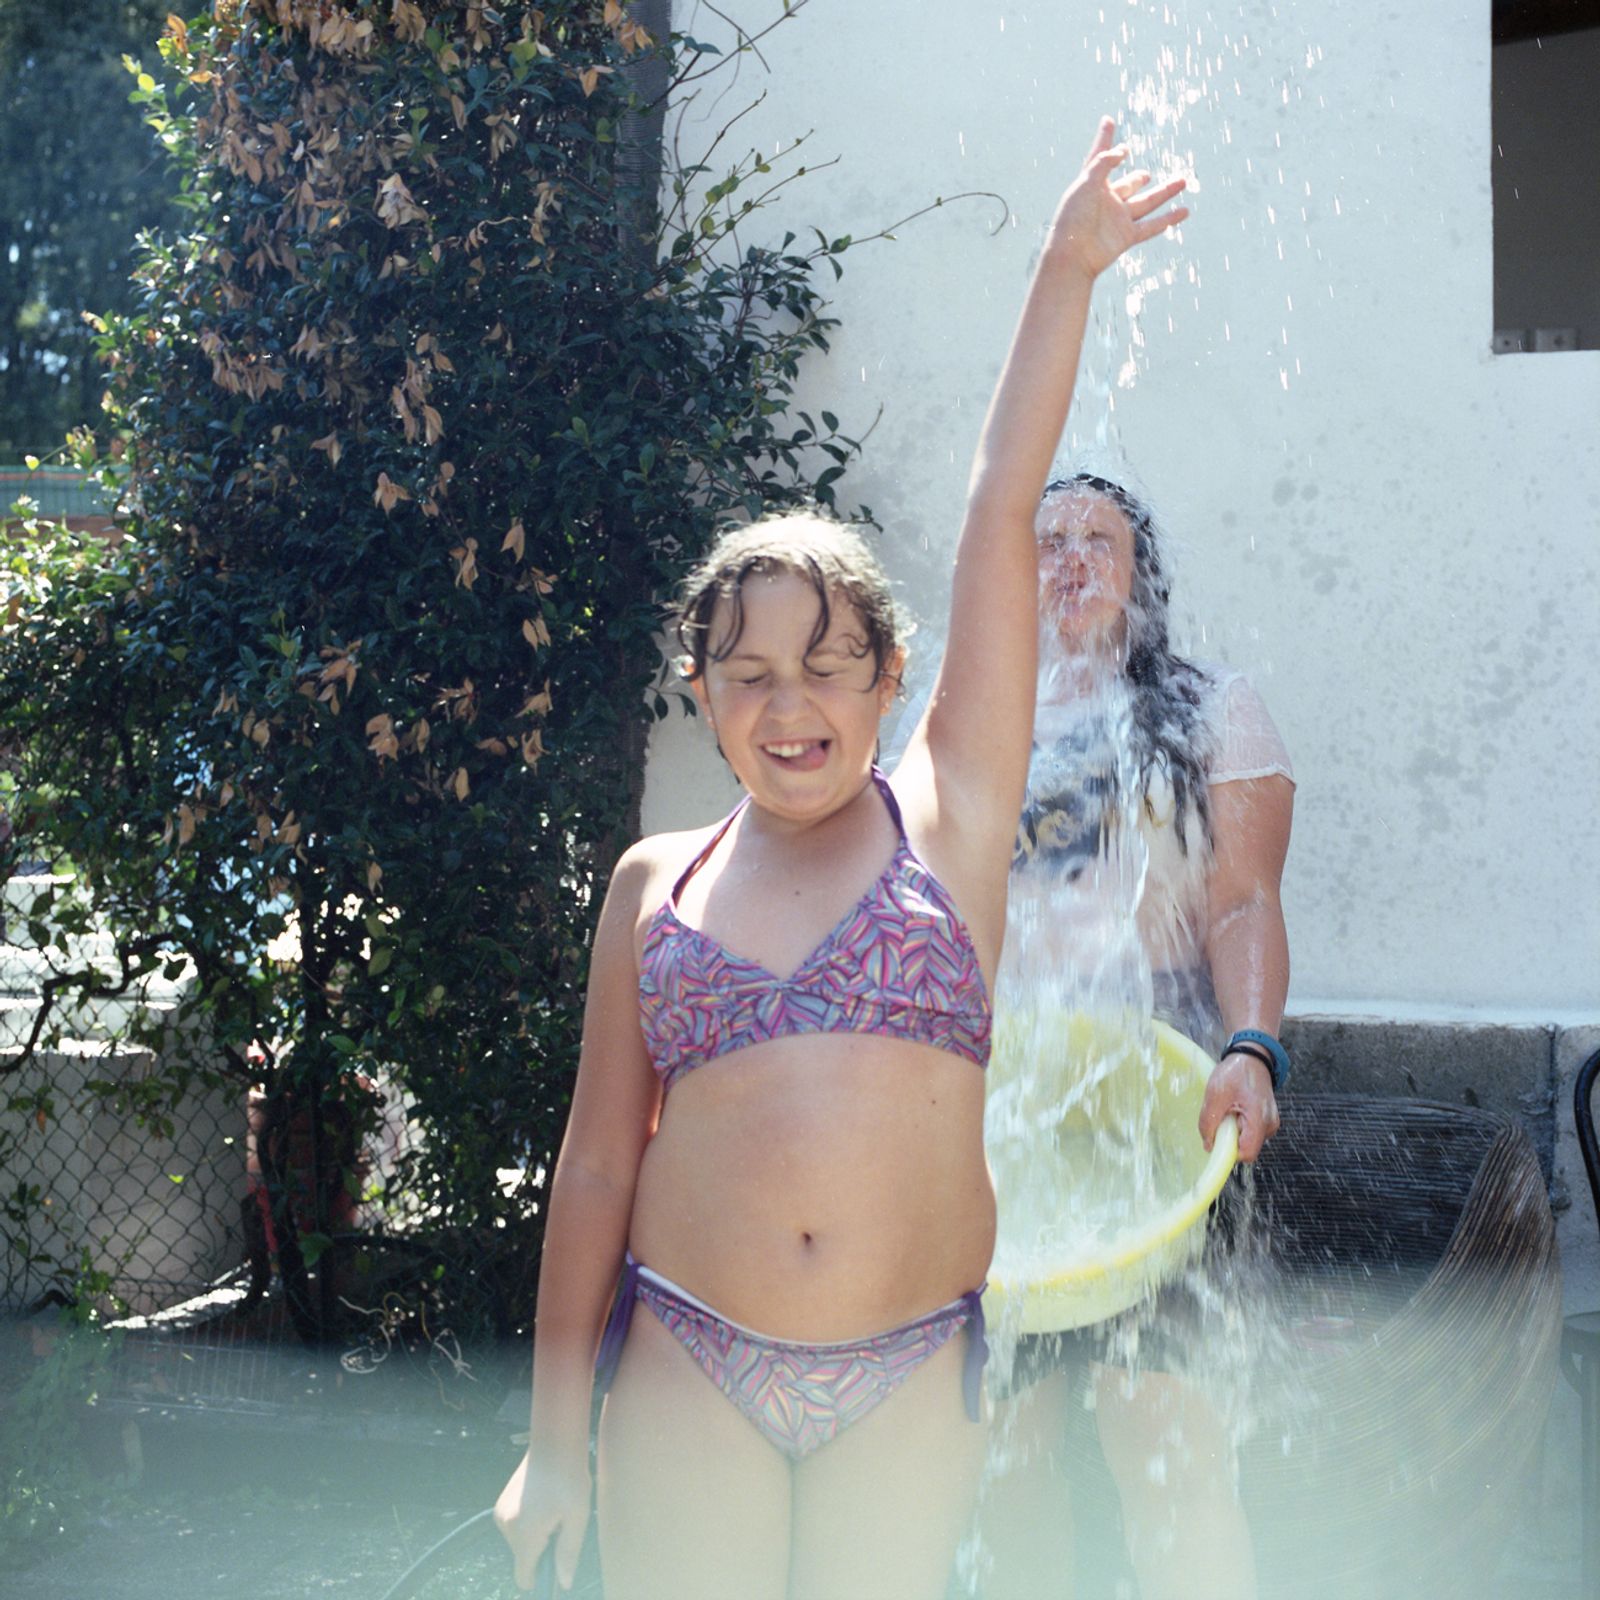 © Chiara Fossati - Alessandra and her sister Martina playing with water on a hot summer day